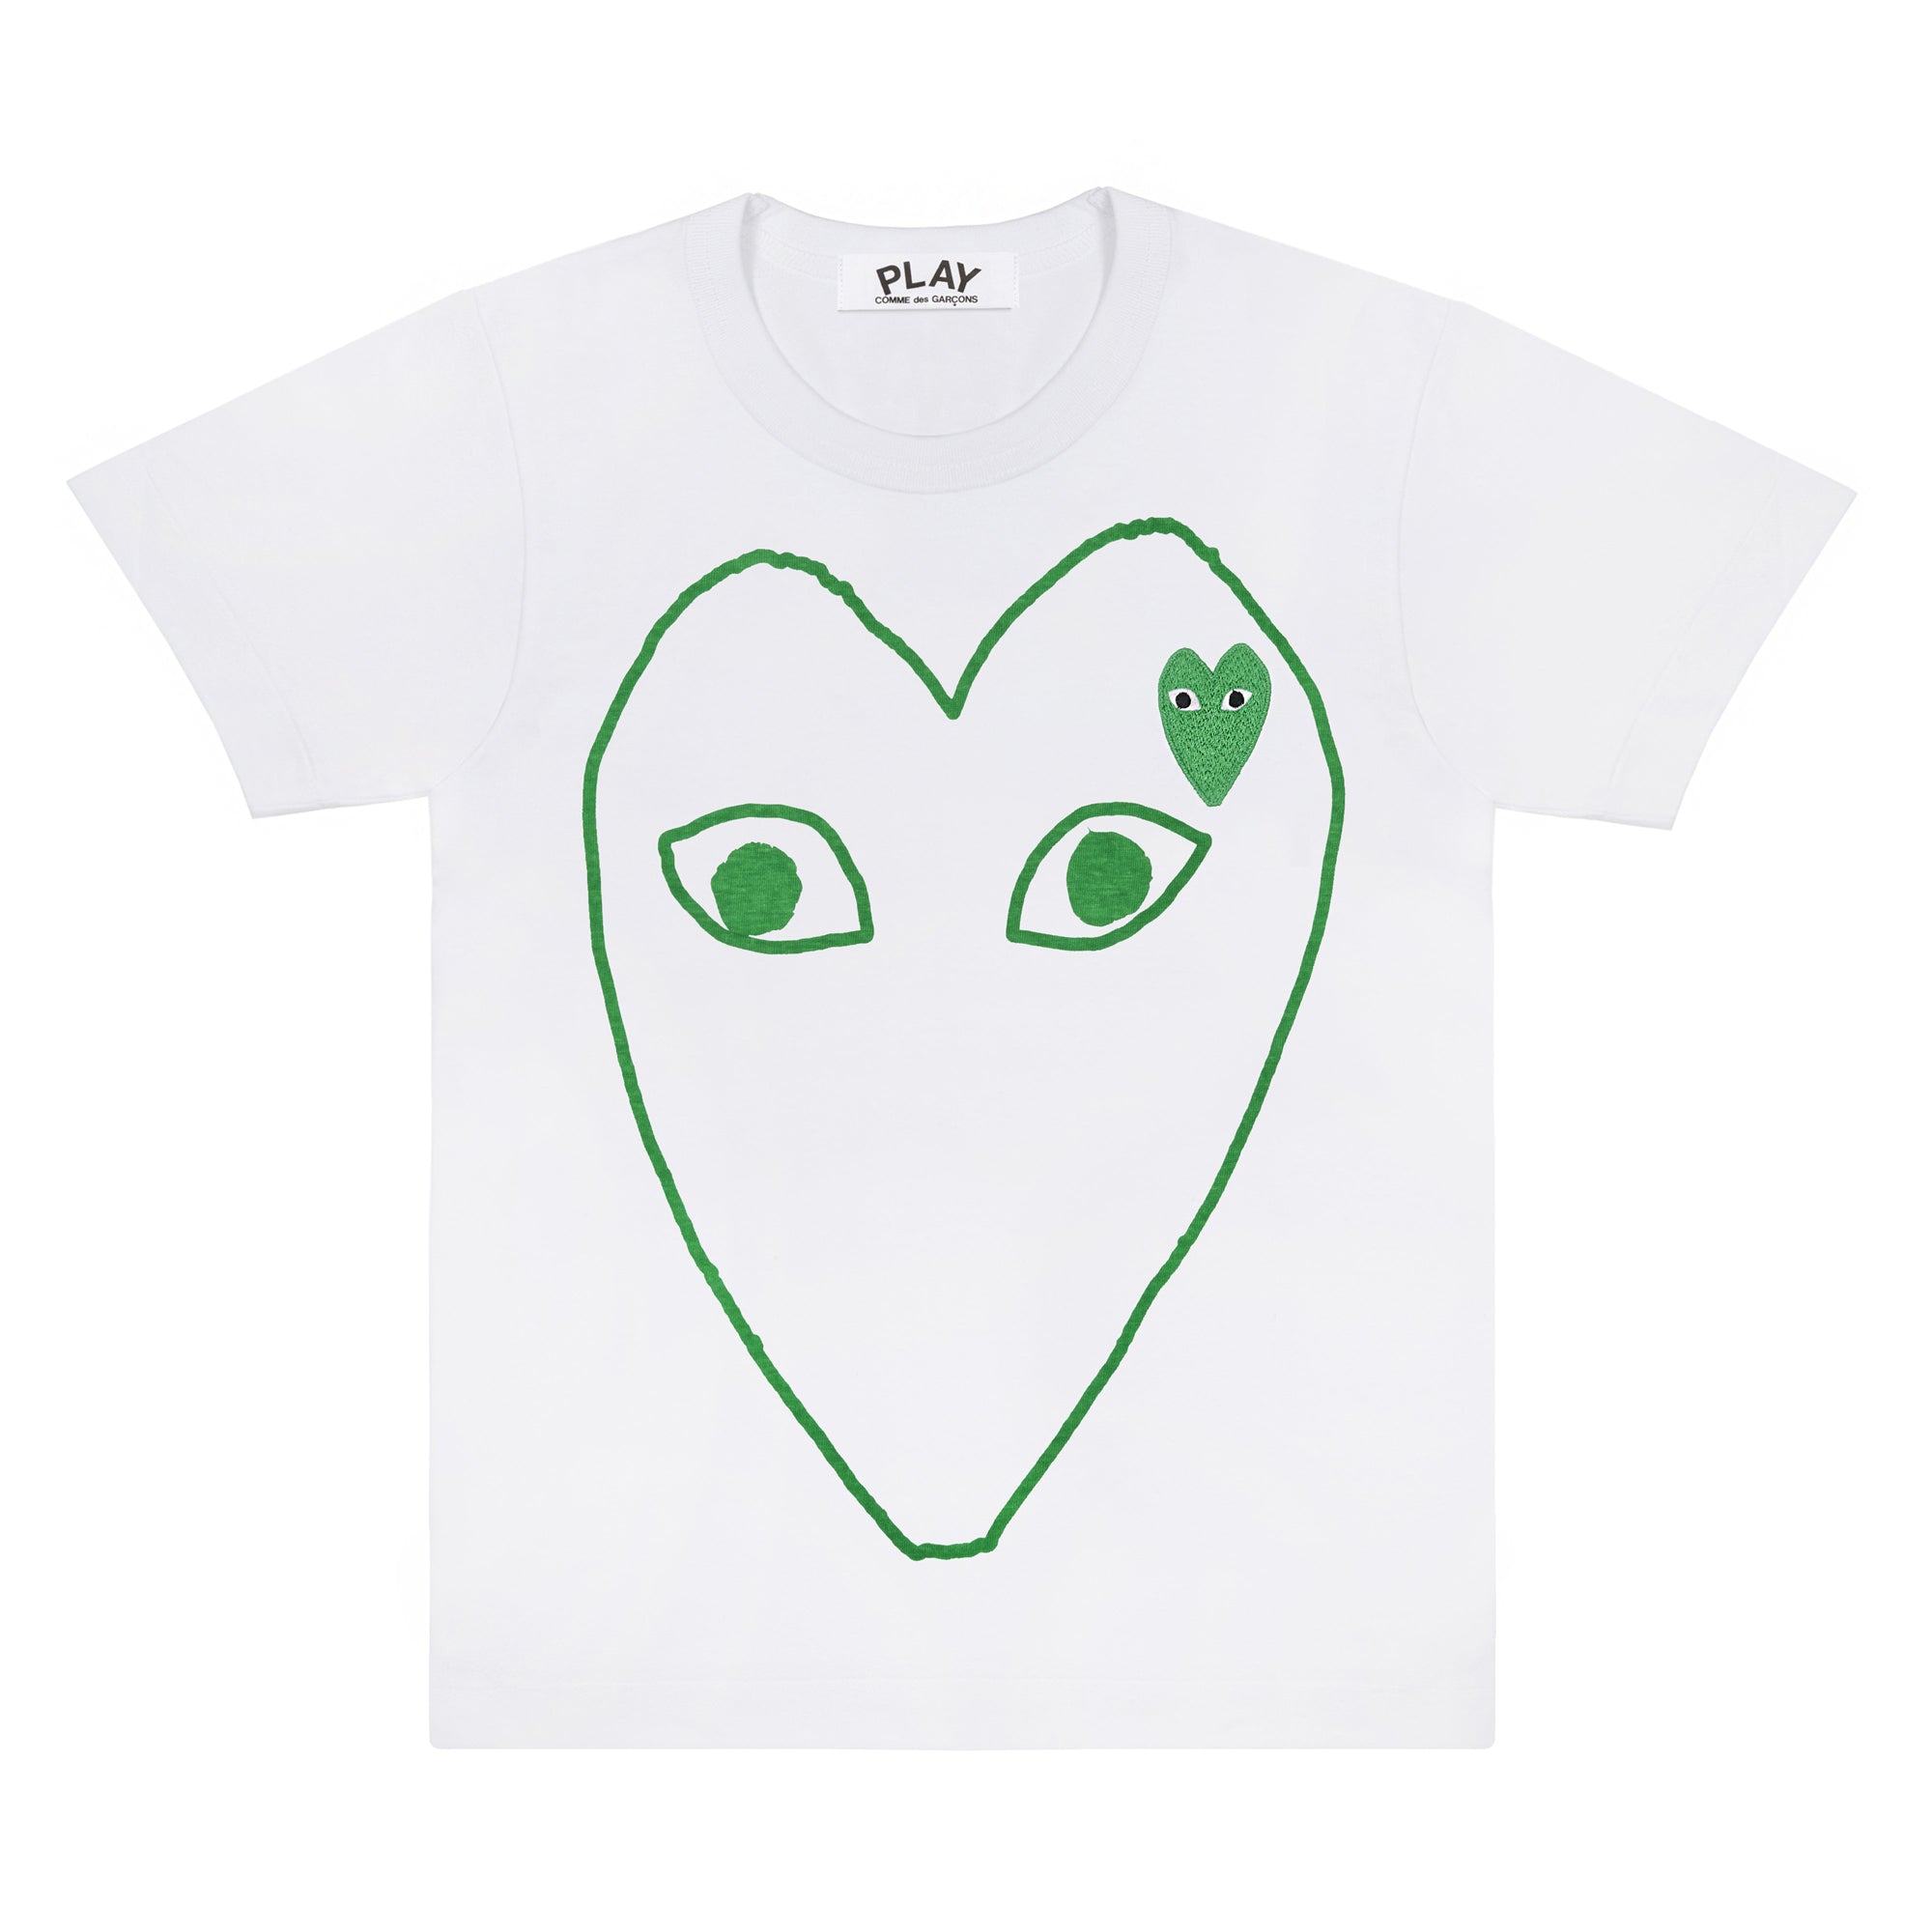 PLAY CDG - COTTON JERSEY PRINT WITH GREEN EMBLEM - (WHITE) view 1